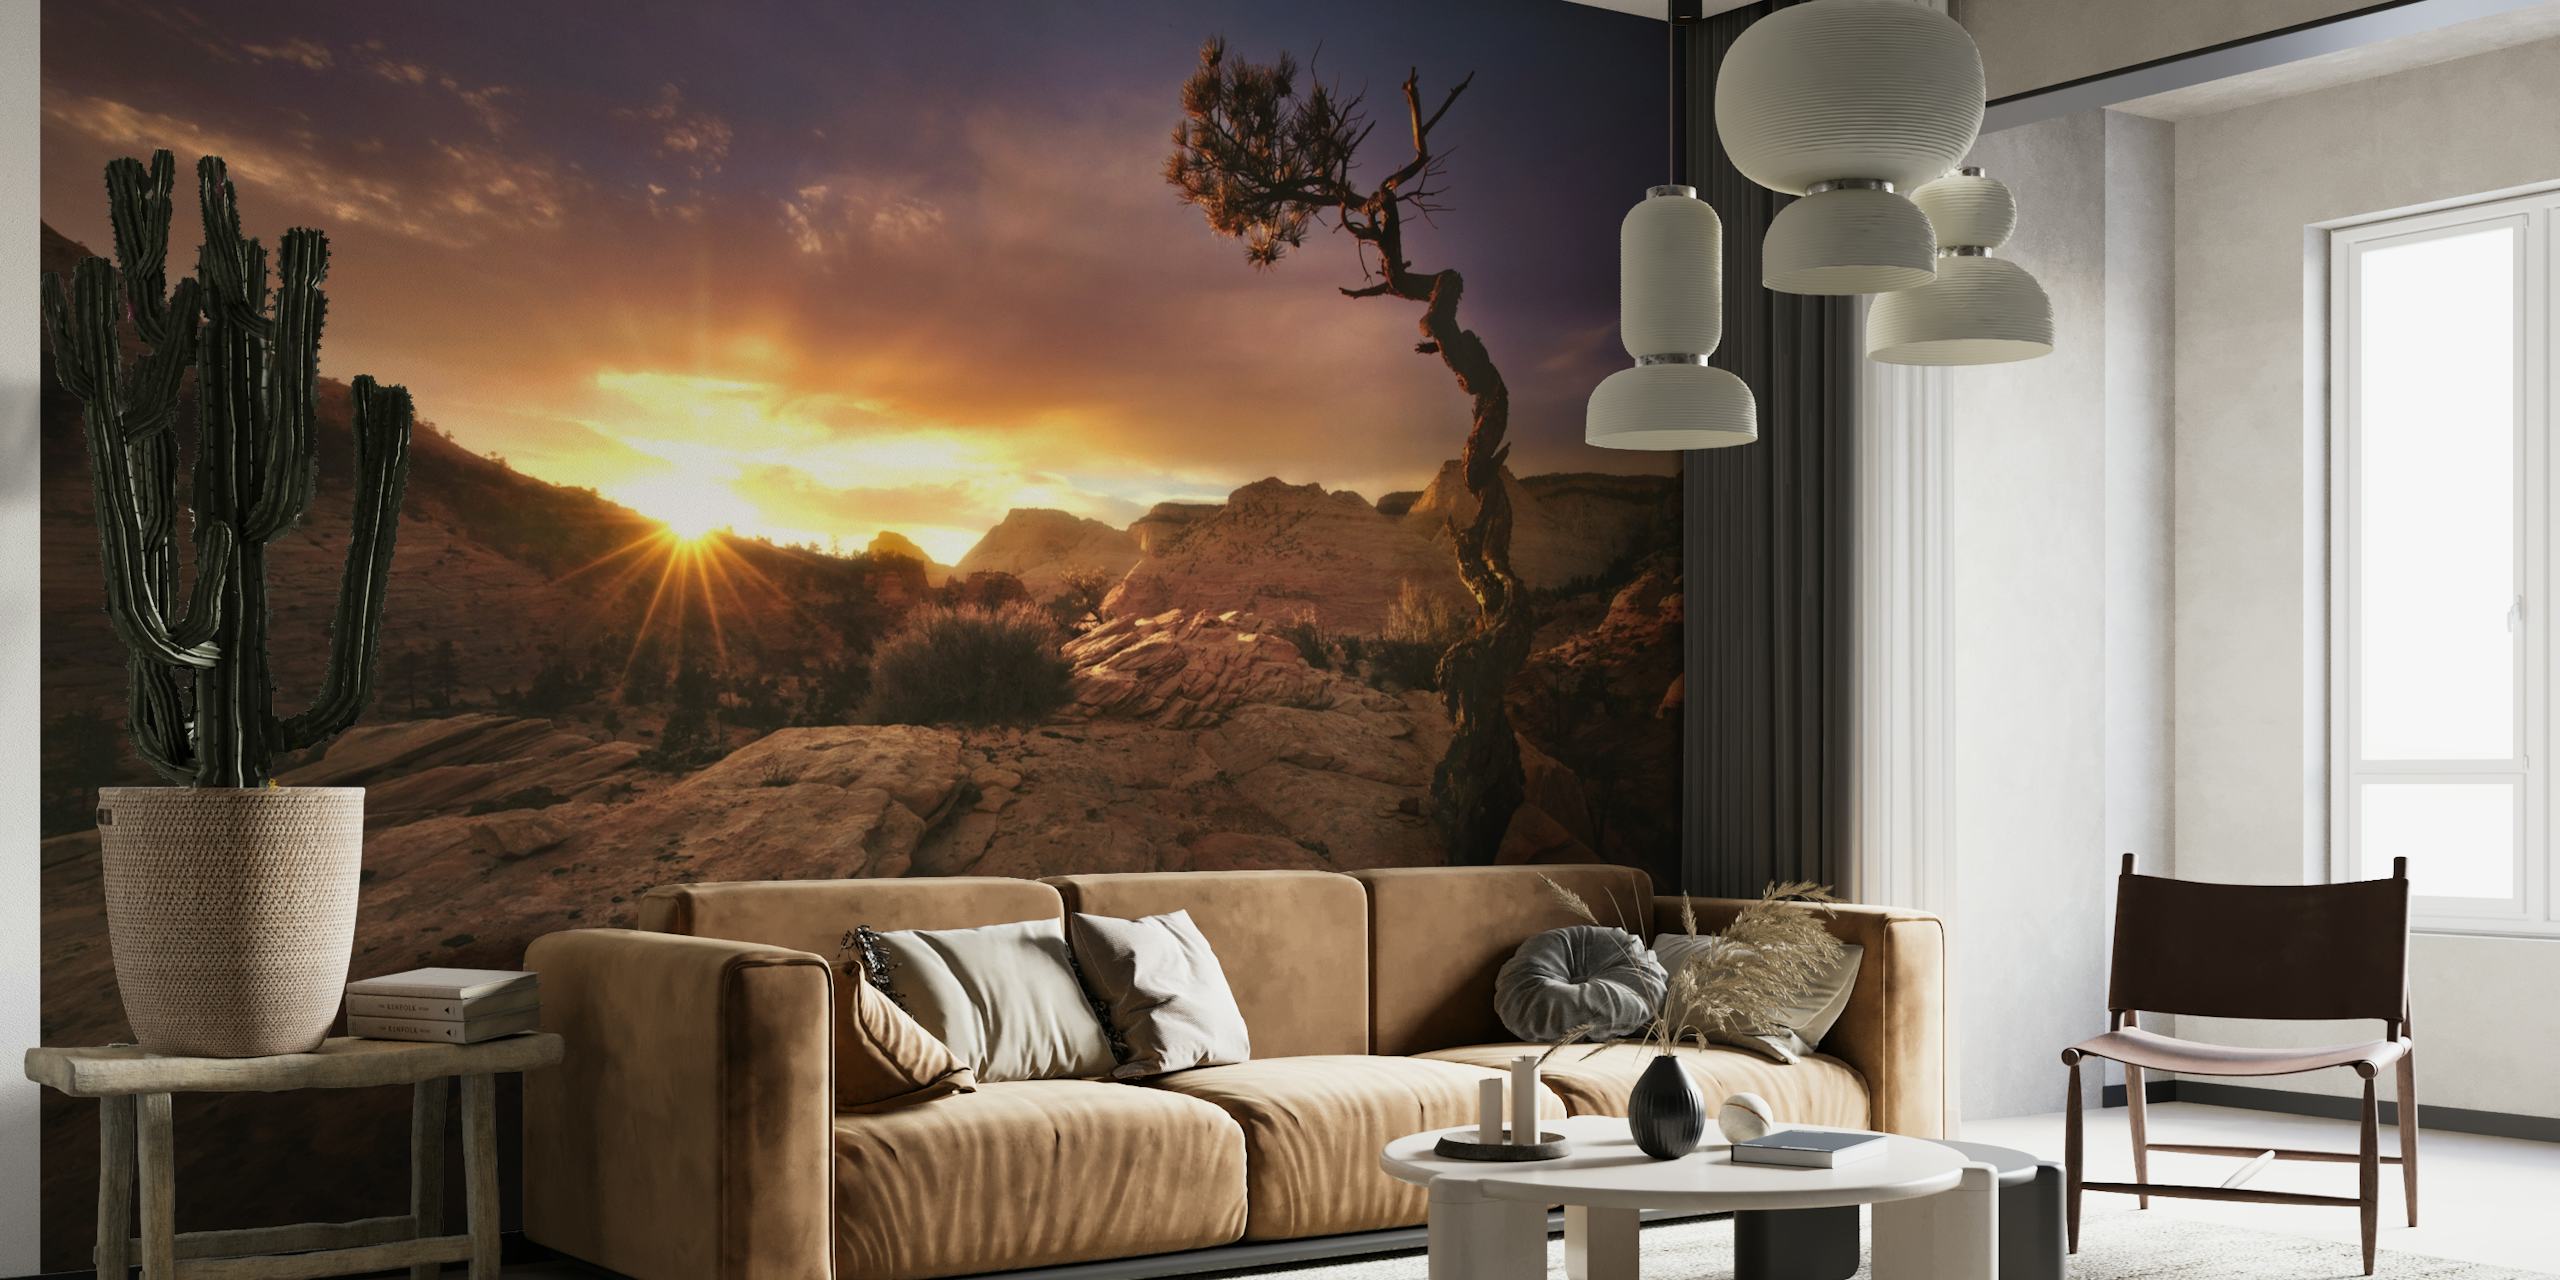 Surreal landscape wall mural with twisted tree and sunset